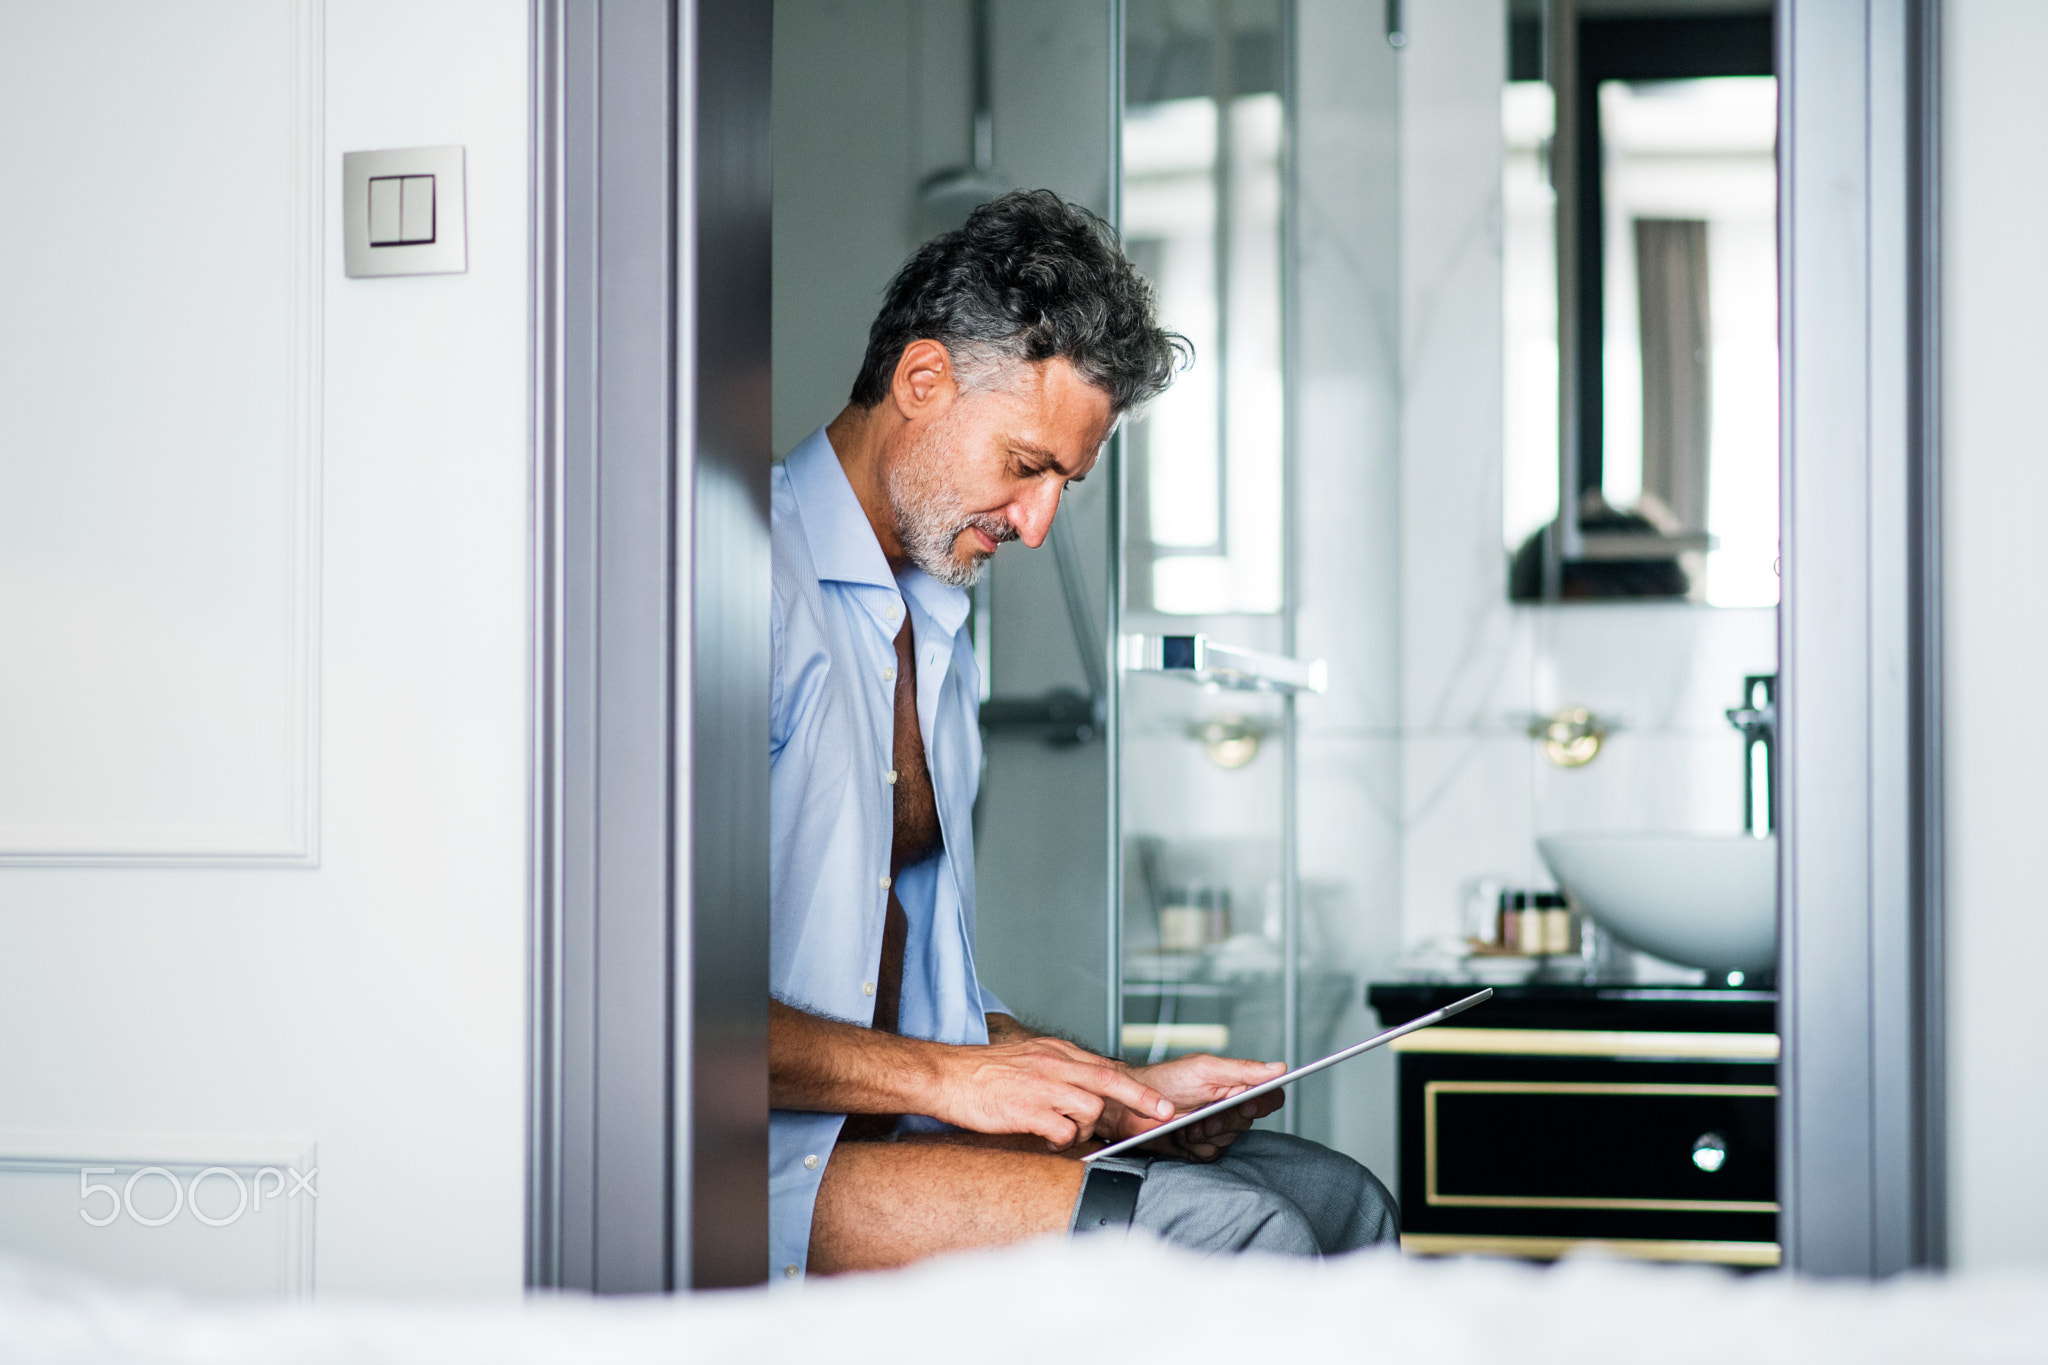 Mature businessman with tablet in a hotel room bathroom.